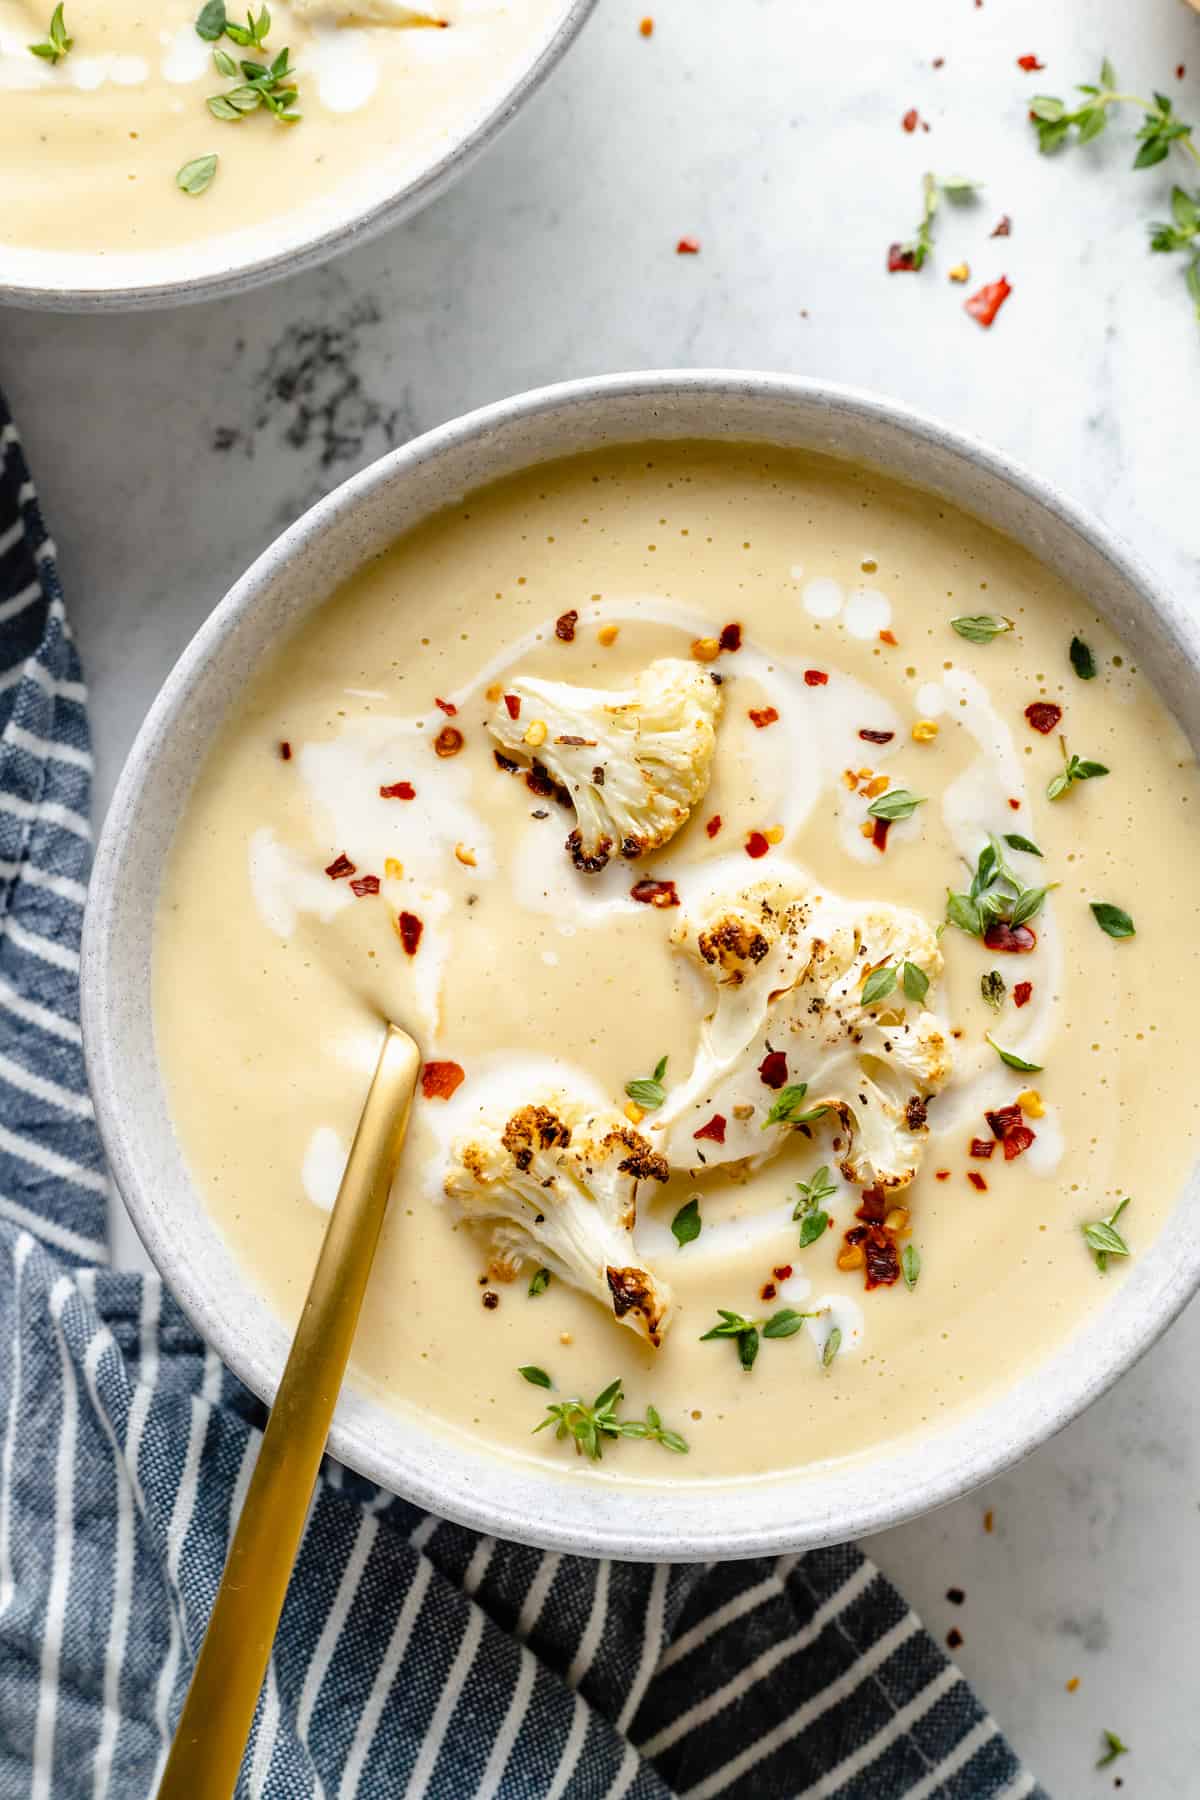 Overhead view of Roasted Cauliflower Soup garnished with cauliflower, red pepper flakes, and thyme